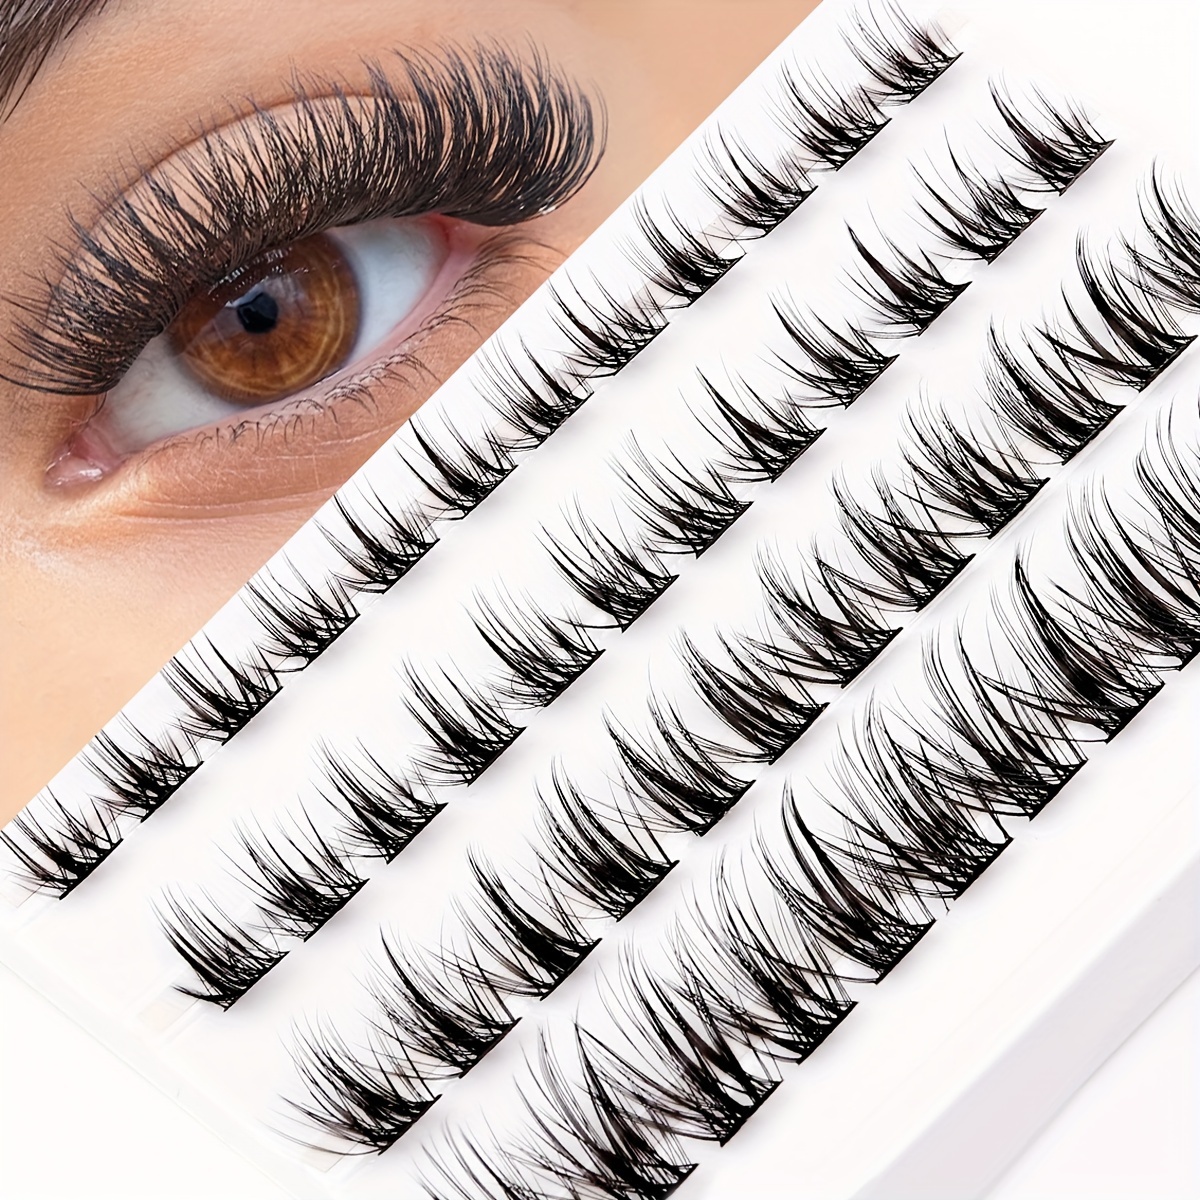 

48 Clusters Diy Eyelashes Kit, Mixed Lengths 10-16mm, Beginners Friendly Segment Lash Extensions, Reusable 3d Curled Effect False Lashes, Quick Eye Contact Dramatic Look